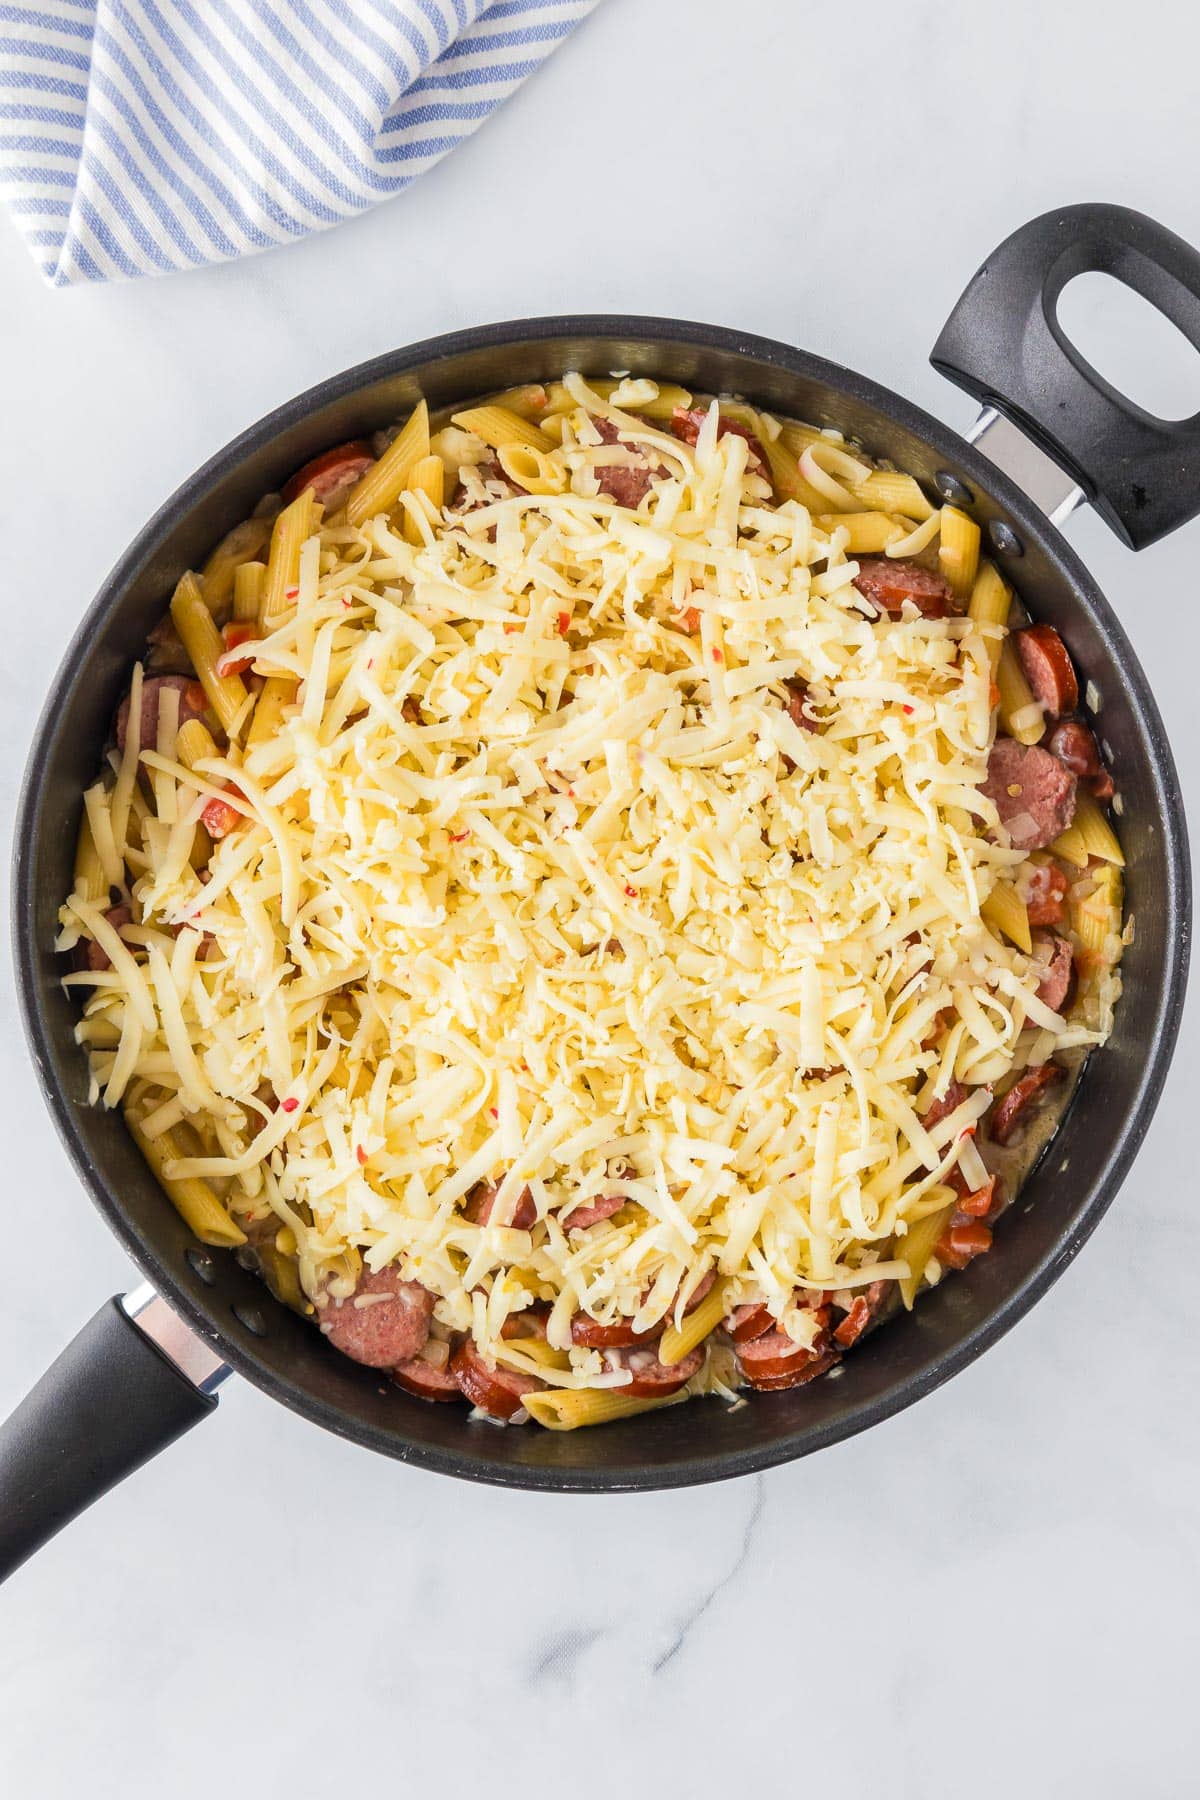 A skillet filled with penne pasta, sausage slices, and shredded cheesy to make cheesy smoked sausage pasta.